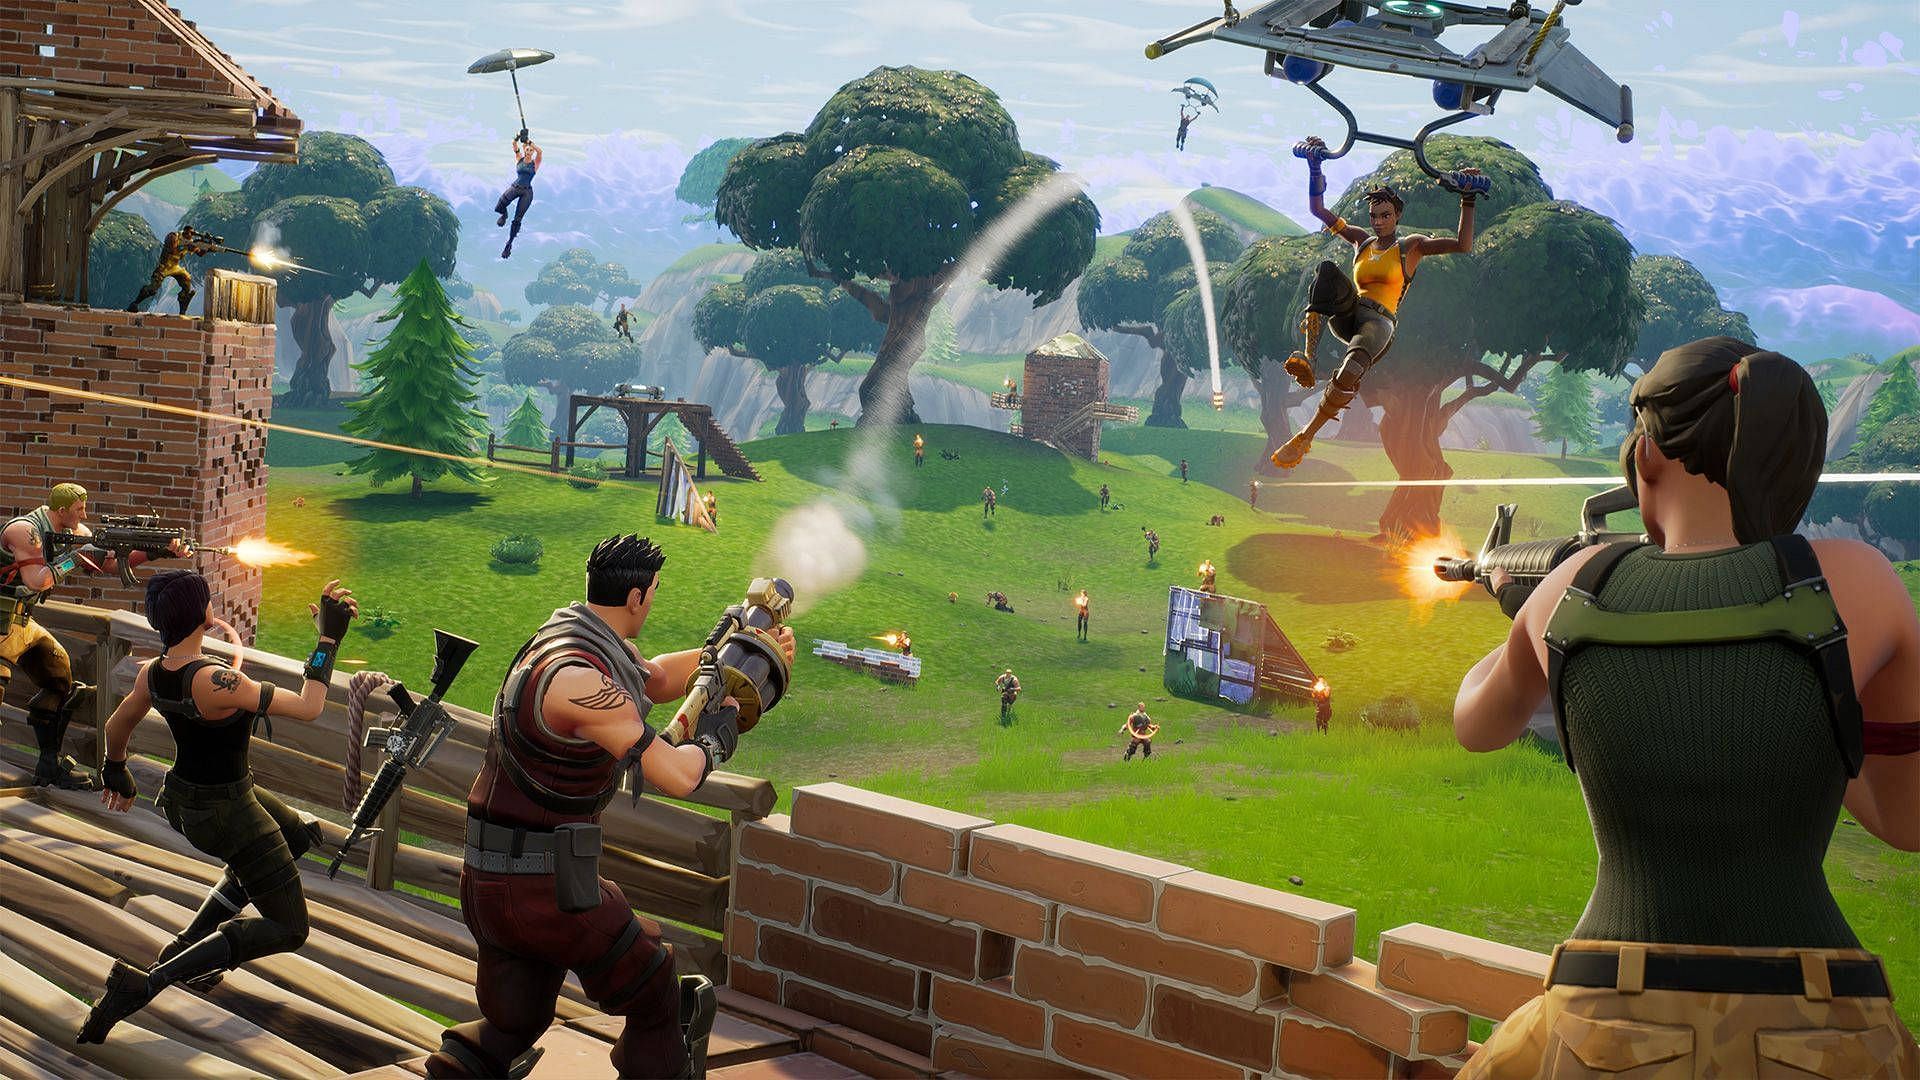 Fortnite community worried about Battle Royale mode, fears it may share the same fate as Save The World